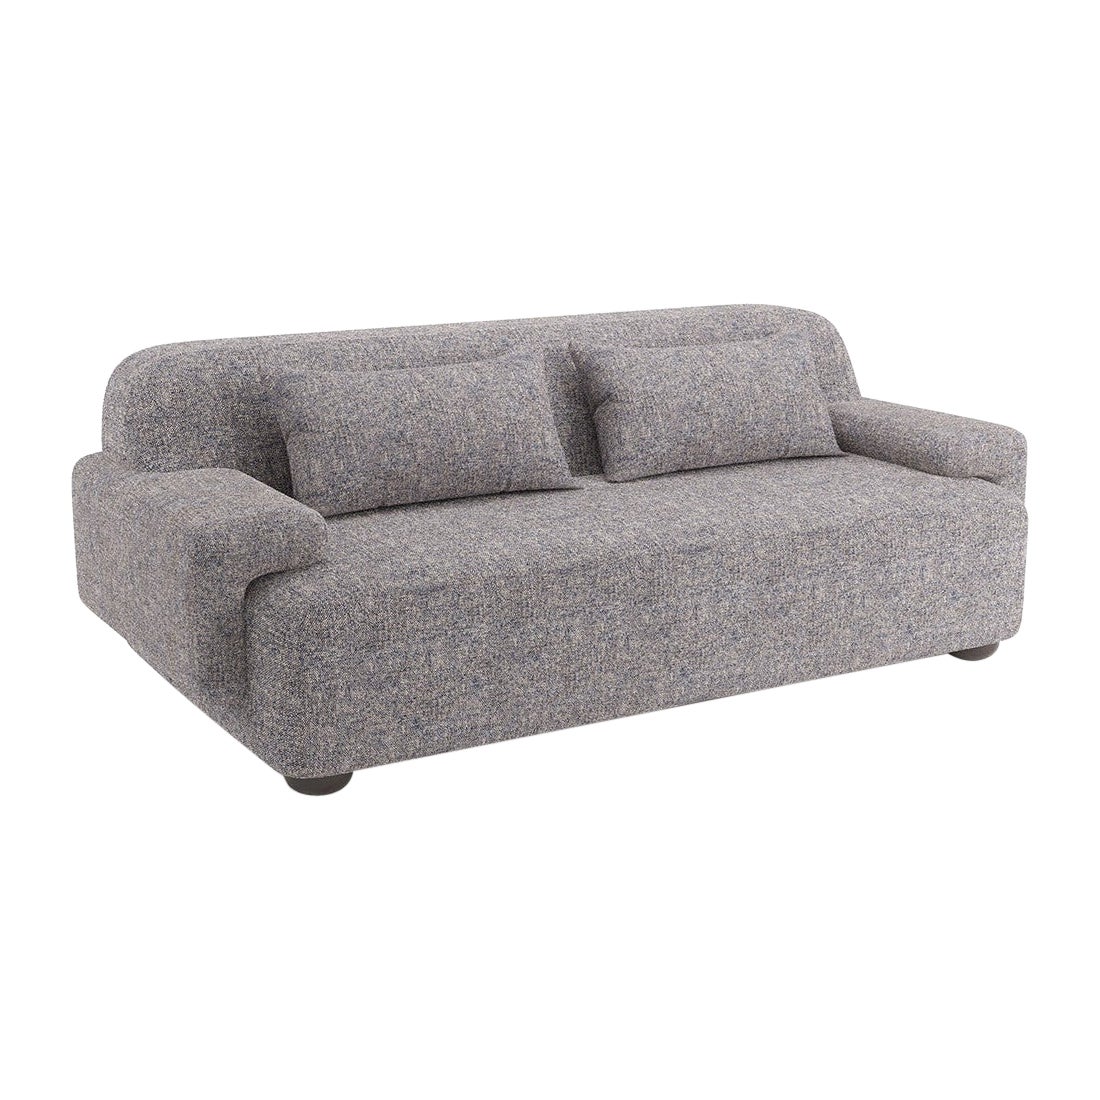 Popus Editions Lena 2.5 Seater Sofa in Marine London Linen Fabric For Sale